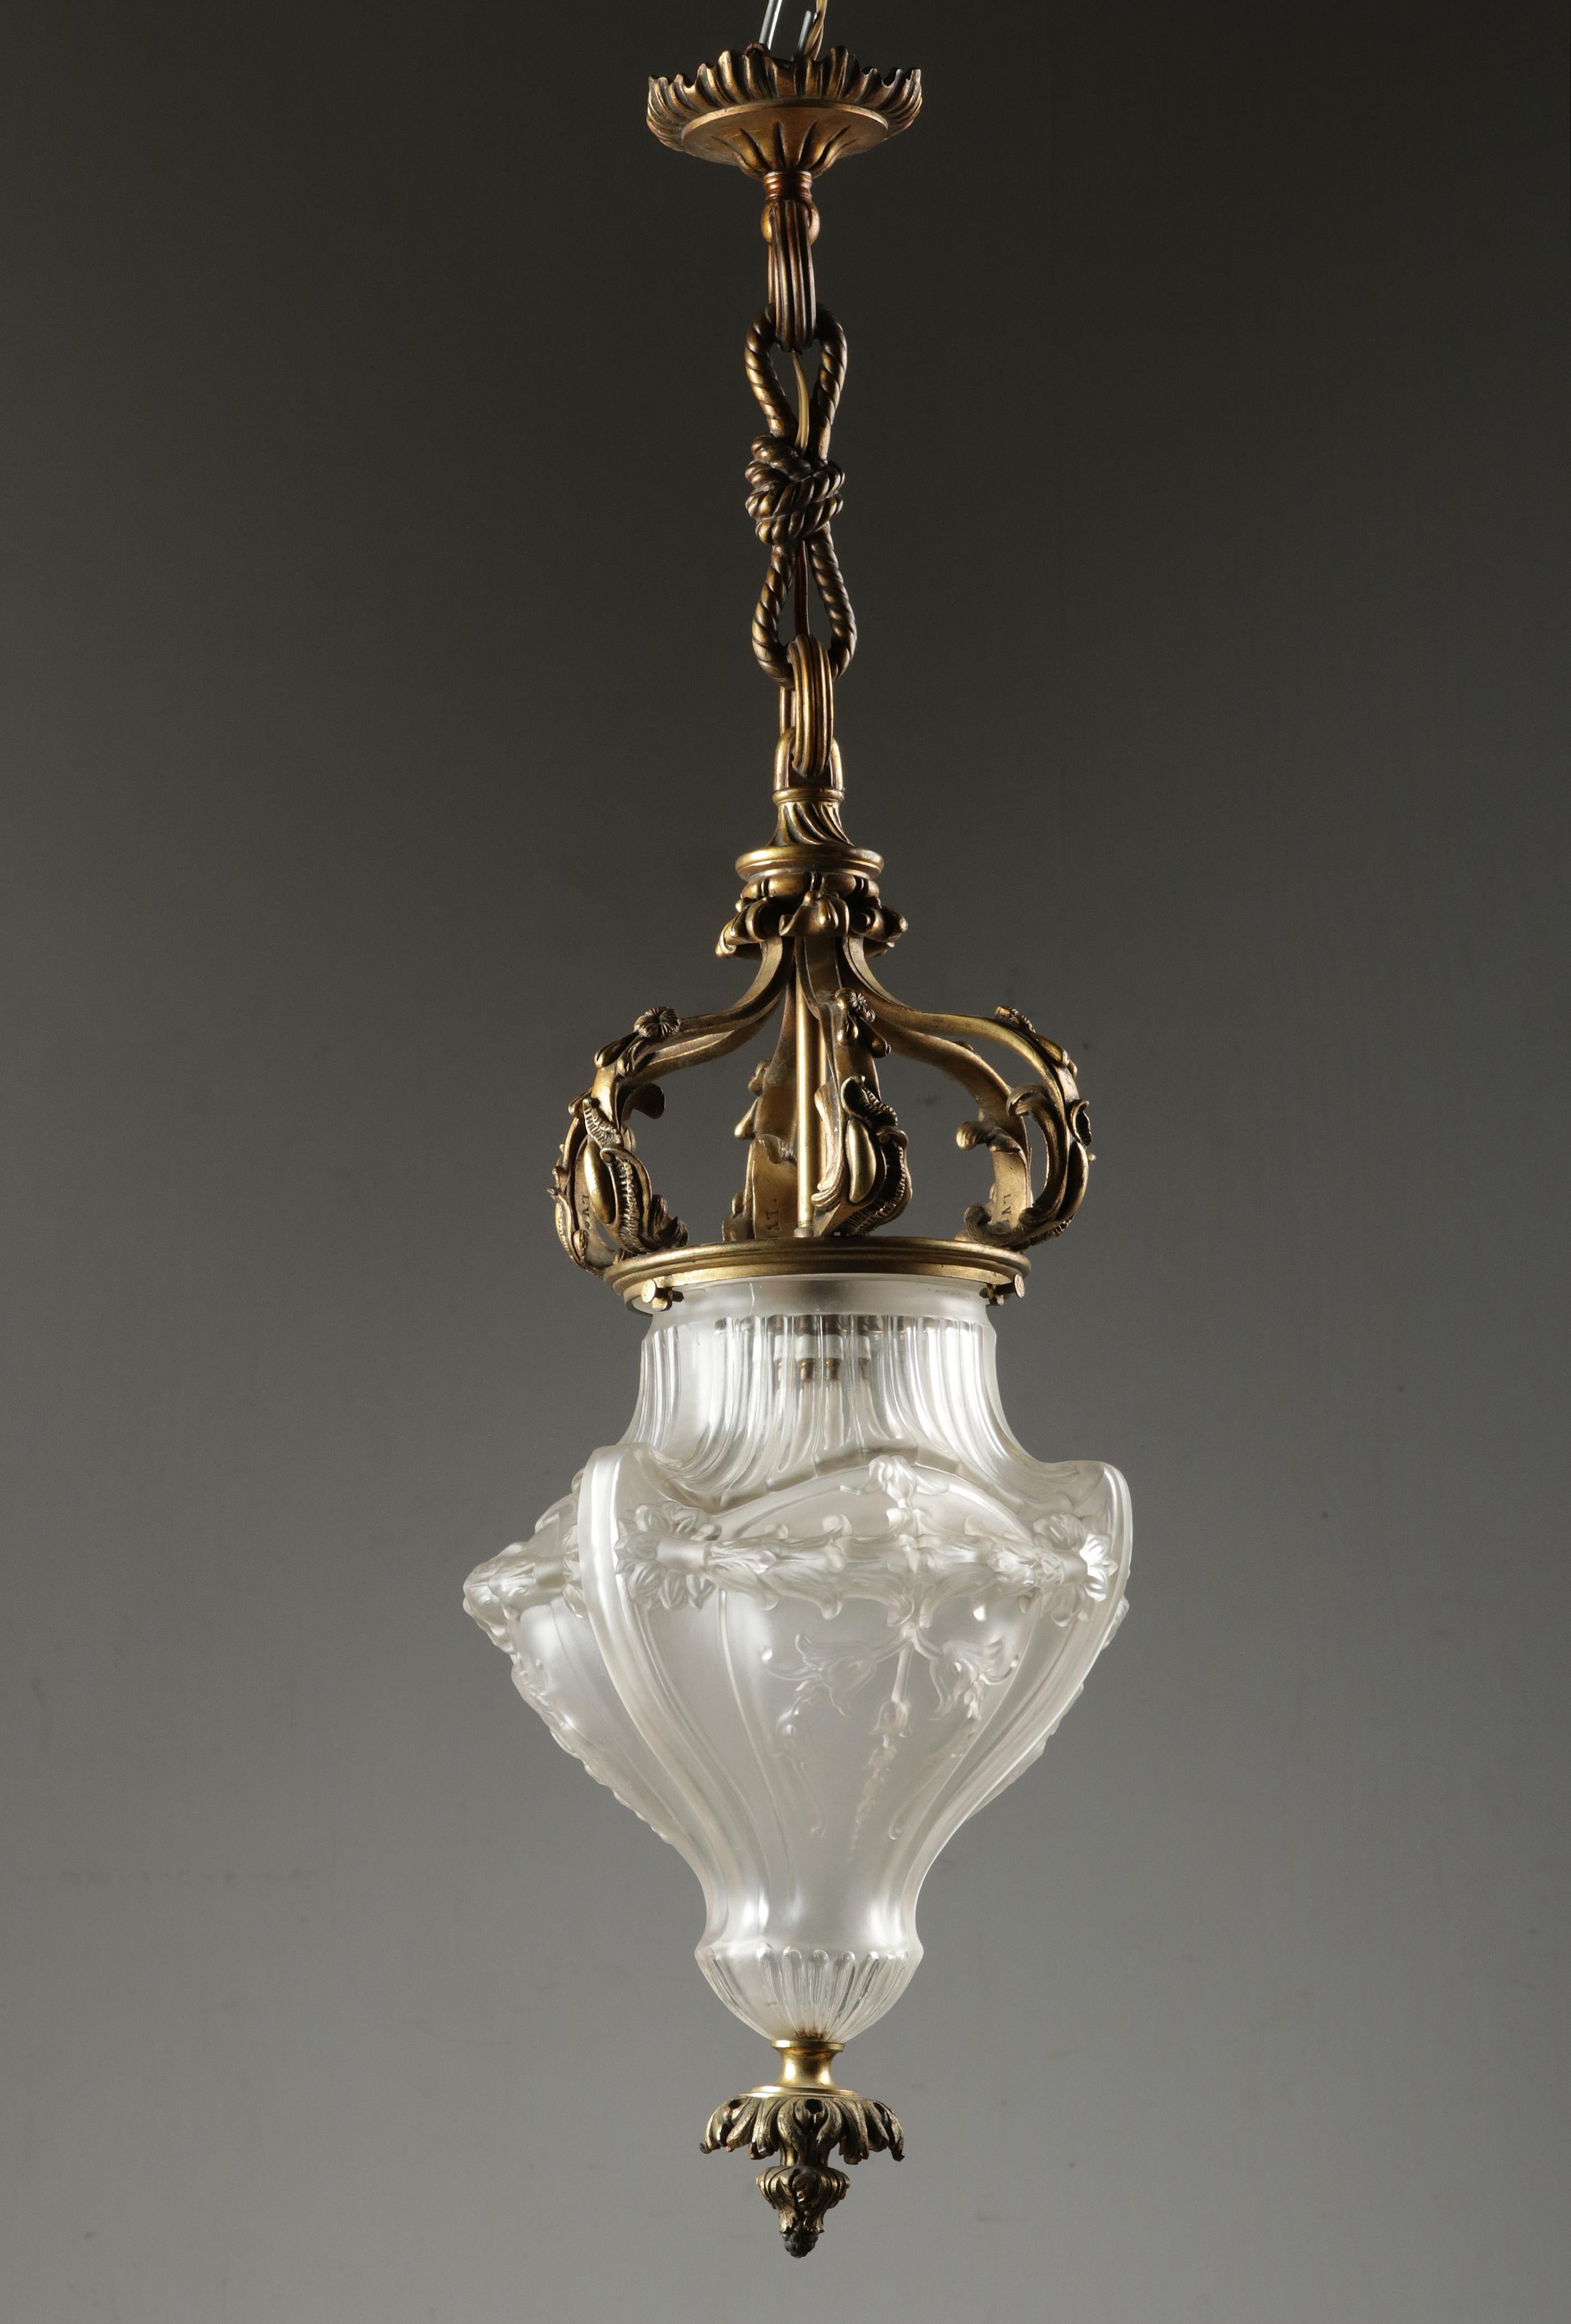 An elegant antique lantern / hallway lamp. The crown-shaped fixture is made entirely of cast bronze. The lampshade is made of molded glass, with floral motifs. Inside one light with an E27 fitting. The lampshade is removable, for a safe shipping.